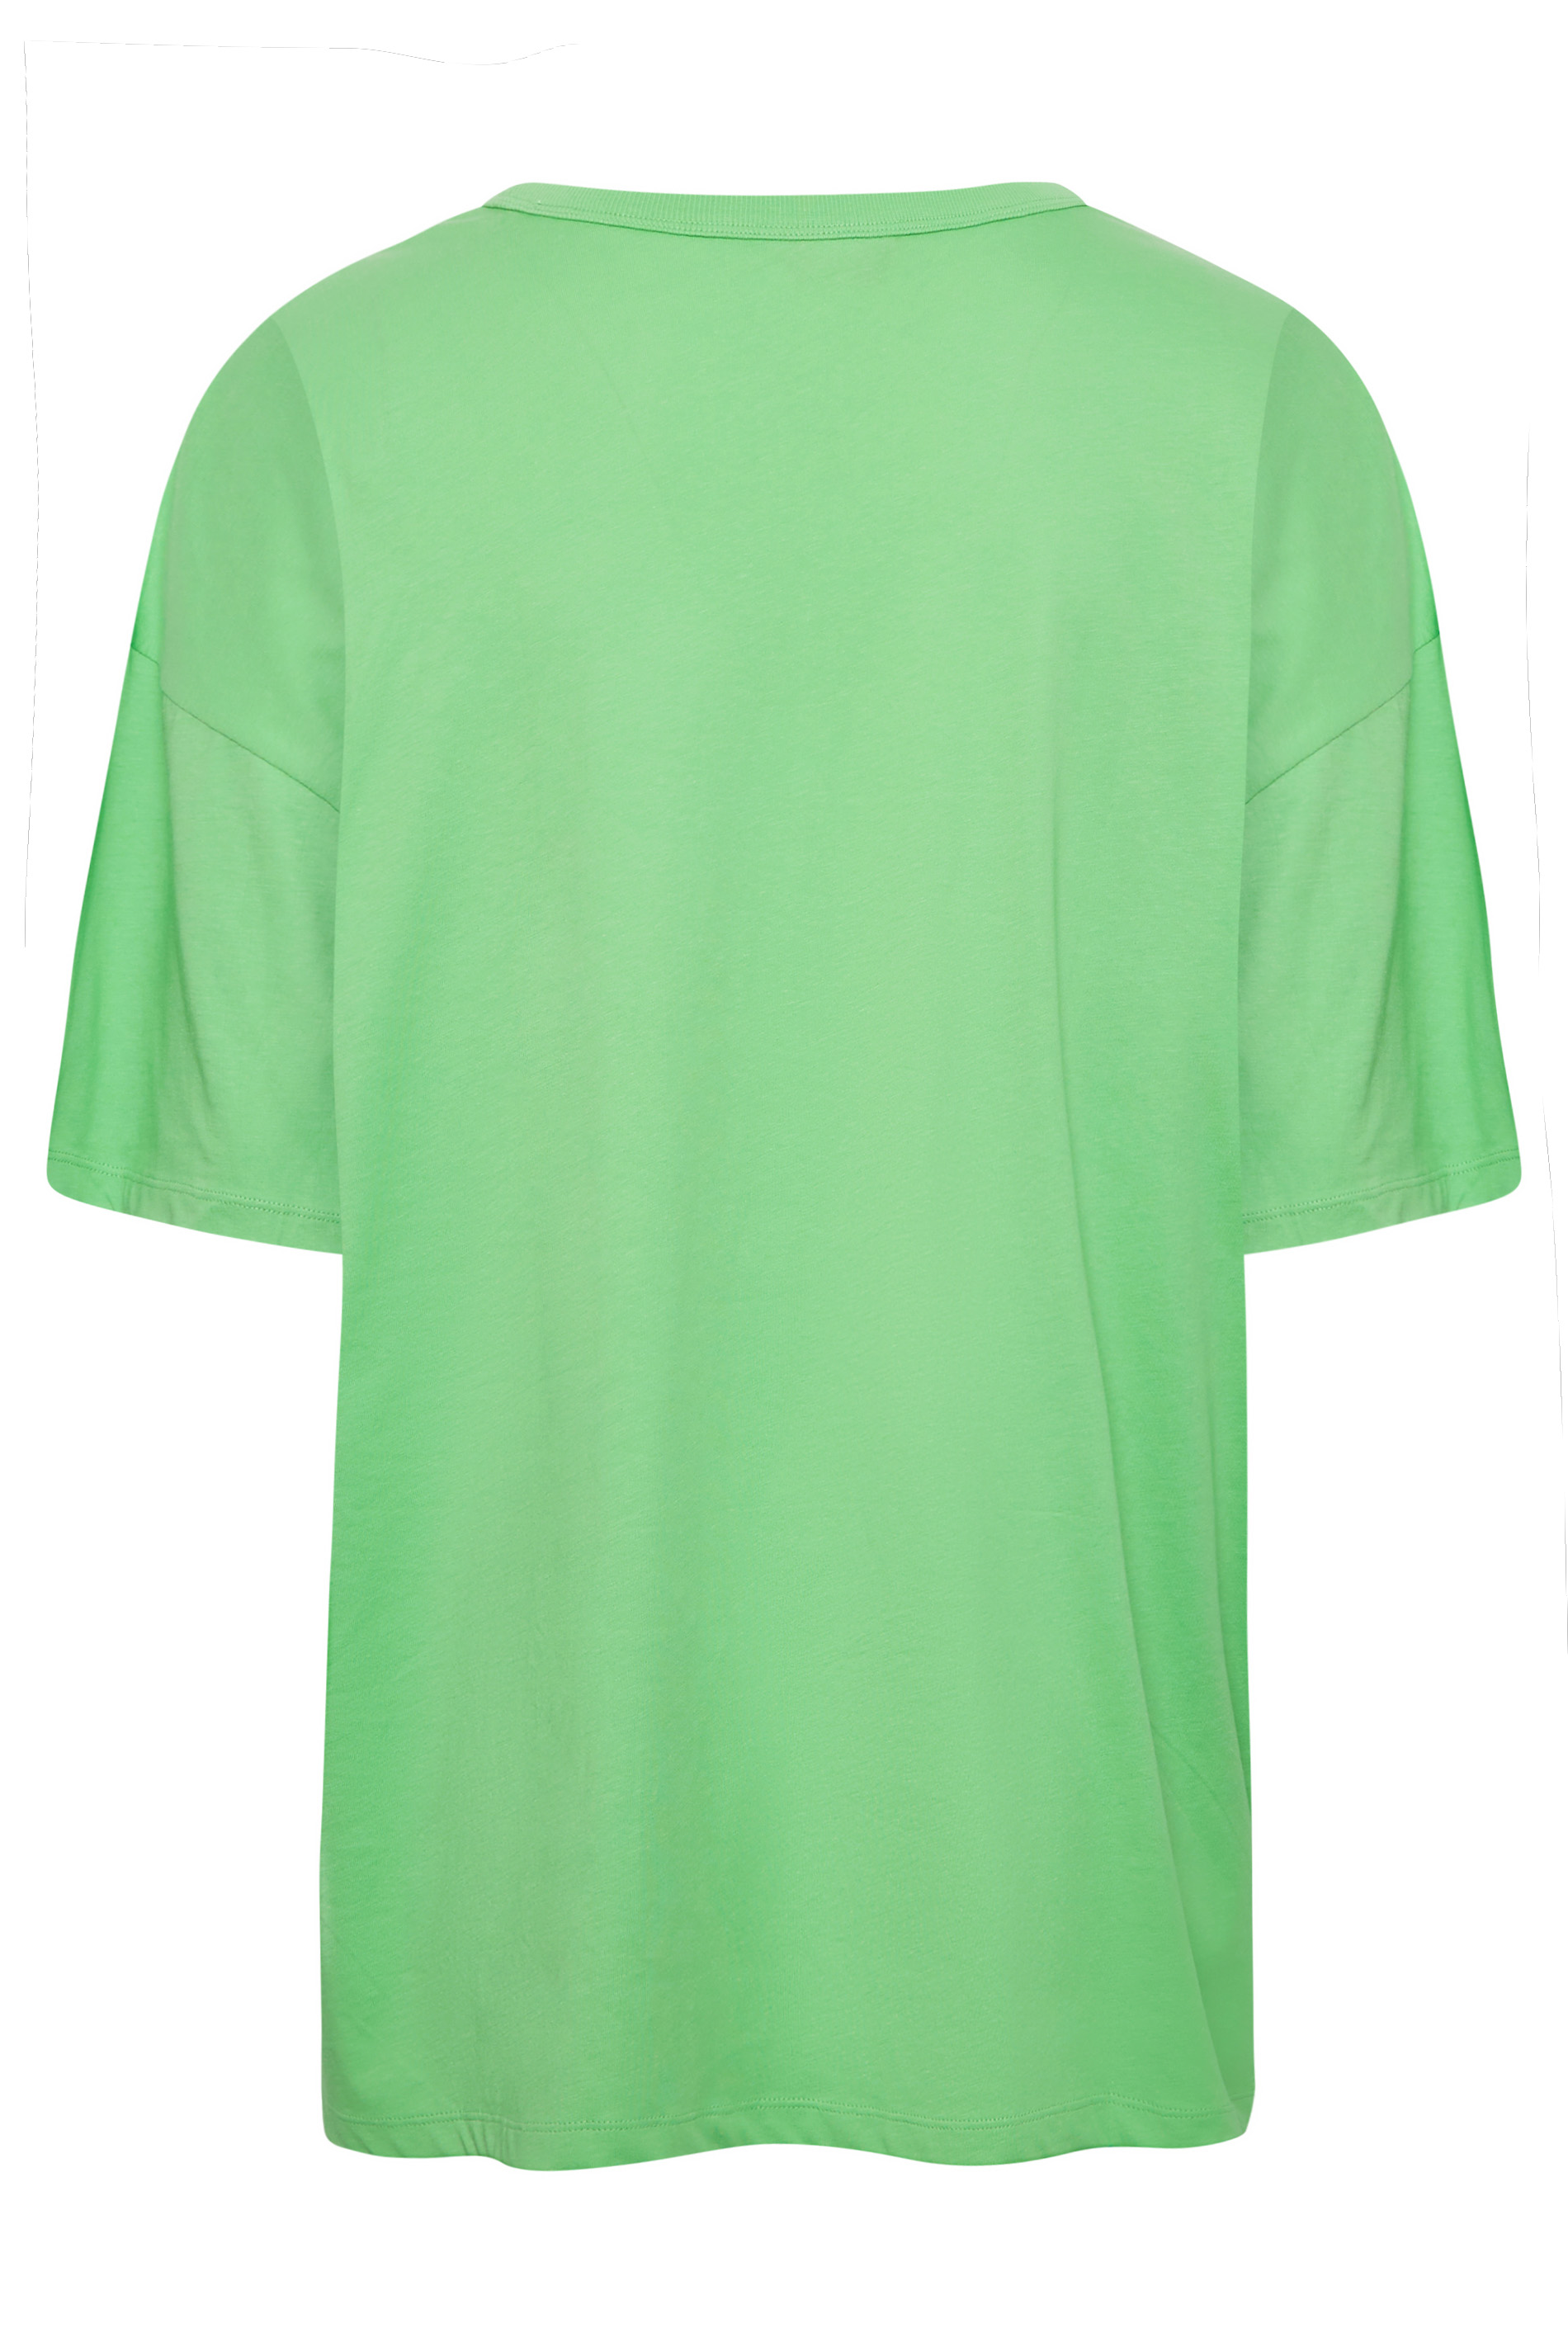 YOURS Plus Size Green Oversized Boxy T-Shirt | Yours Clothing